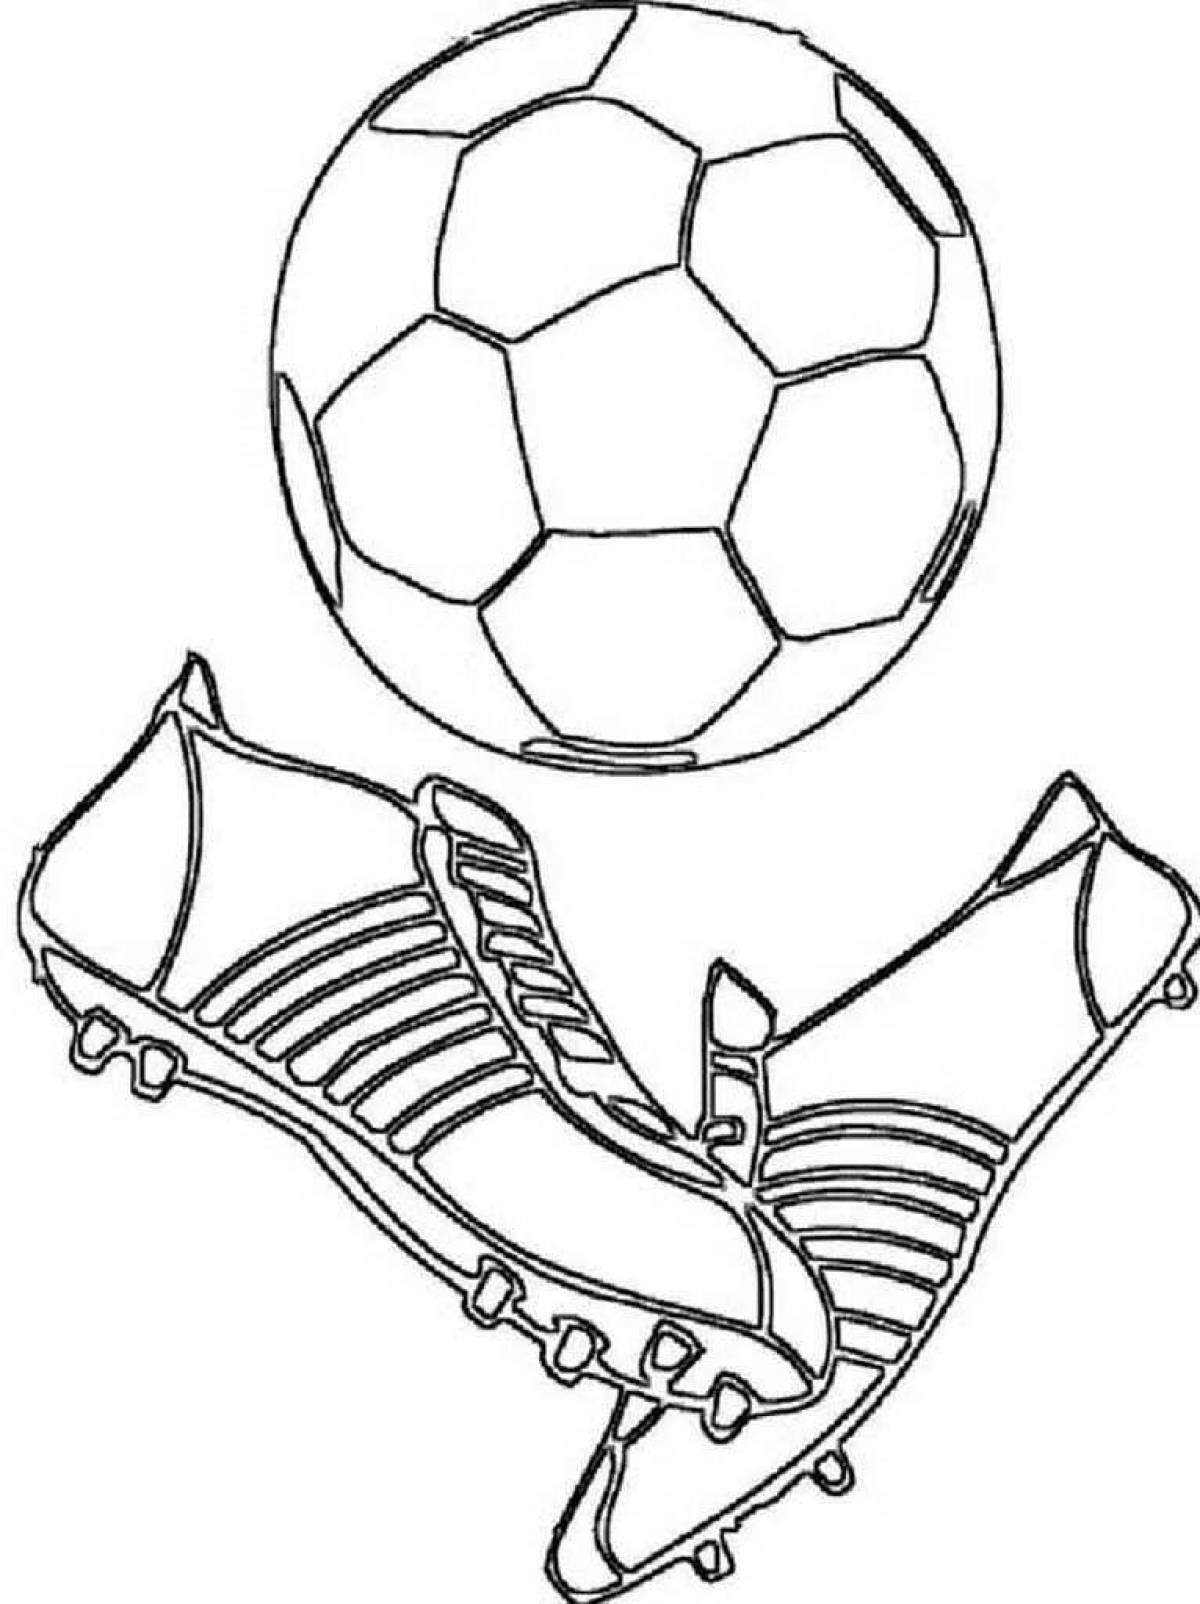 Outstanding Boys Football Coloring Page